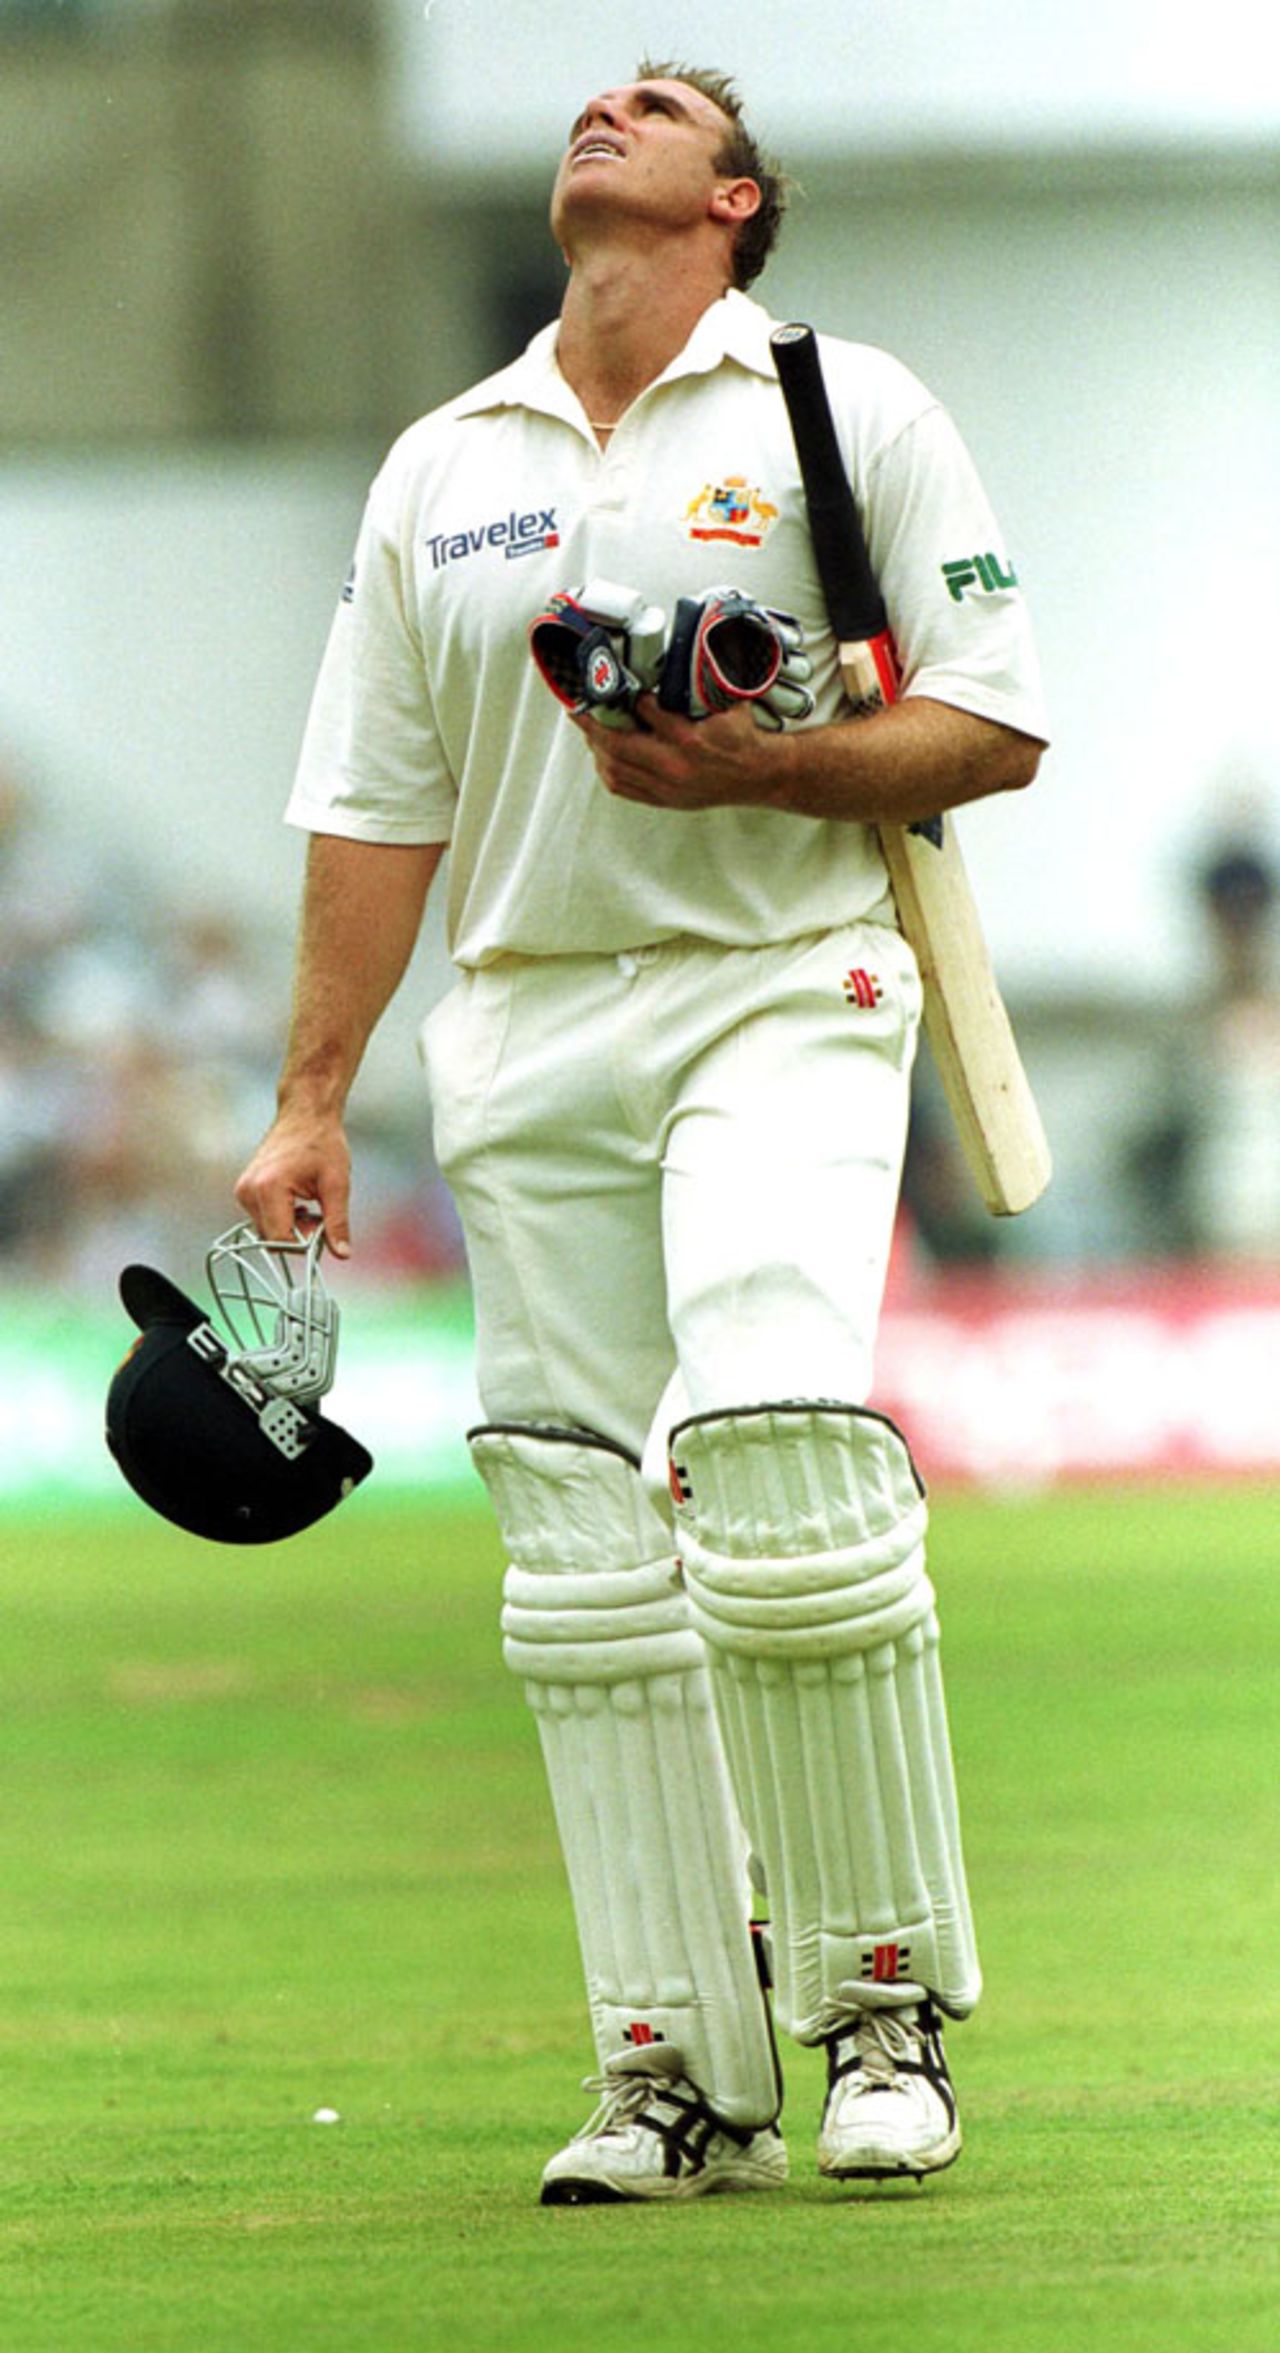 Matthew Hayden looks up to the heavens after getting out, England v Australia, 5th Test, The Oval, 1st day, August 23, 2001